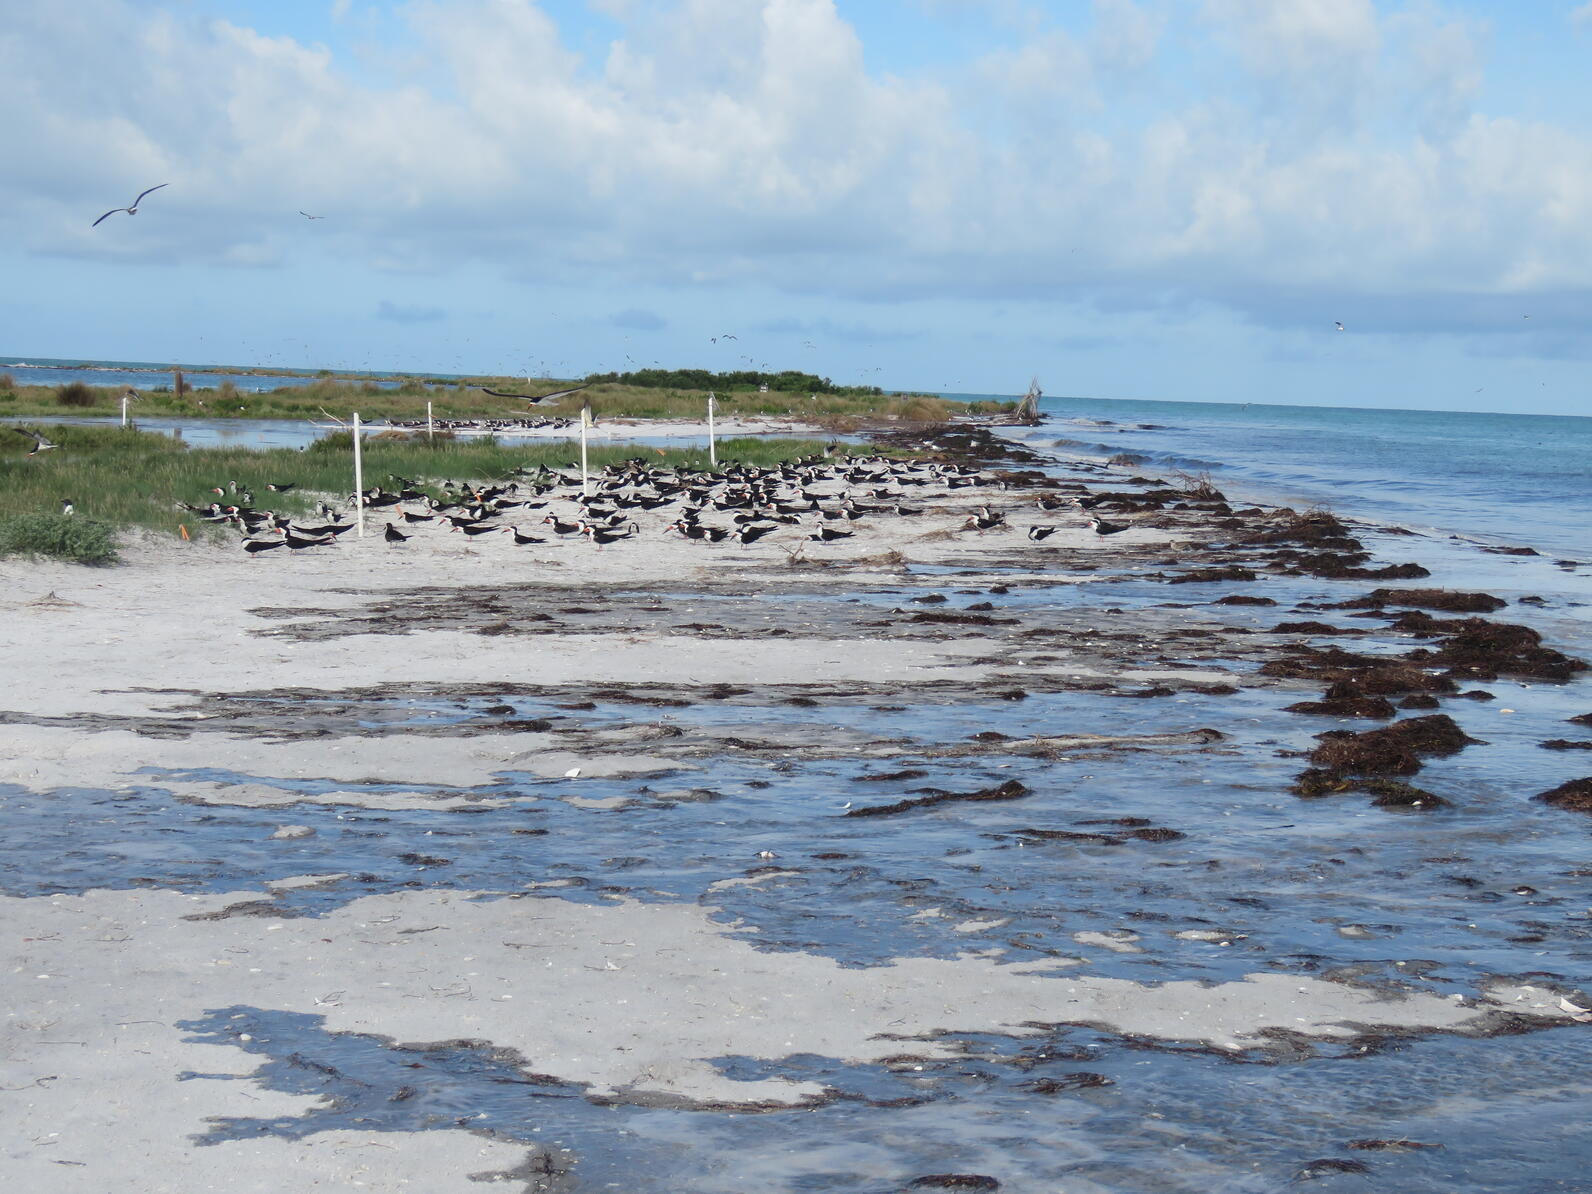 A flock of black and white birds on the beach.